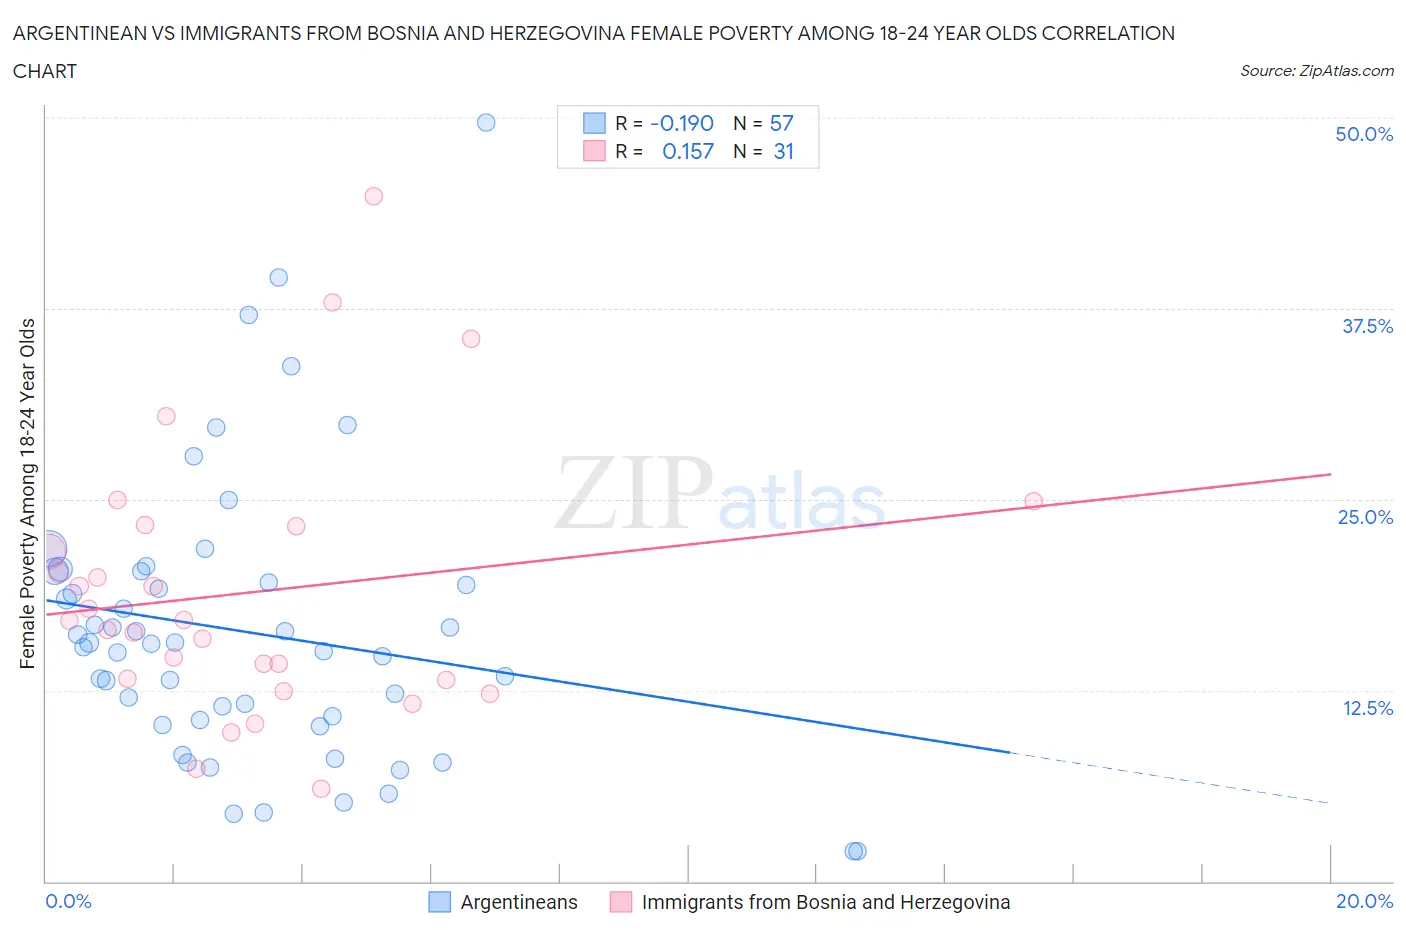 Argentinean vs Immigrants from Bosnia and Herzegovina Female Poverty Among 18-24 Year Olds